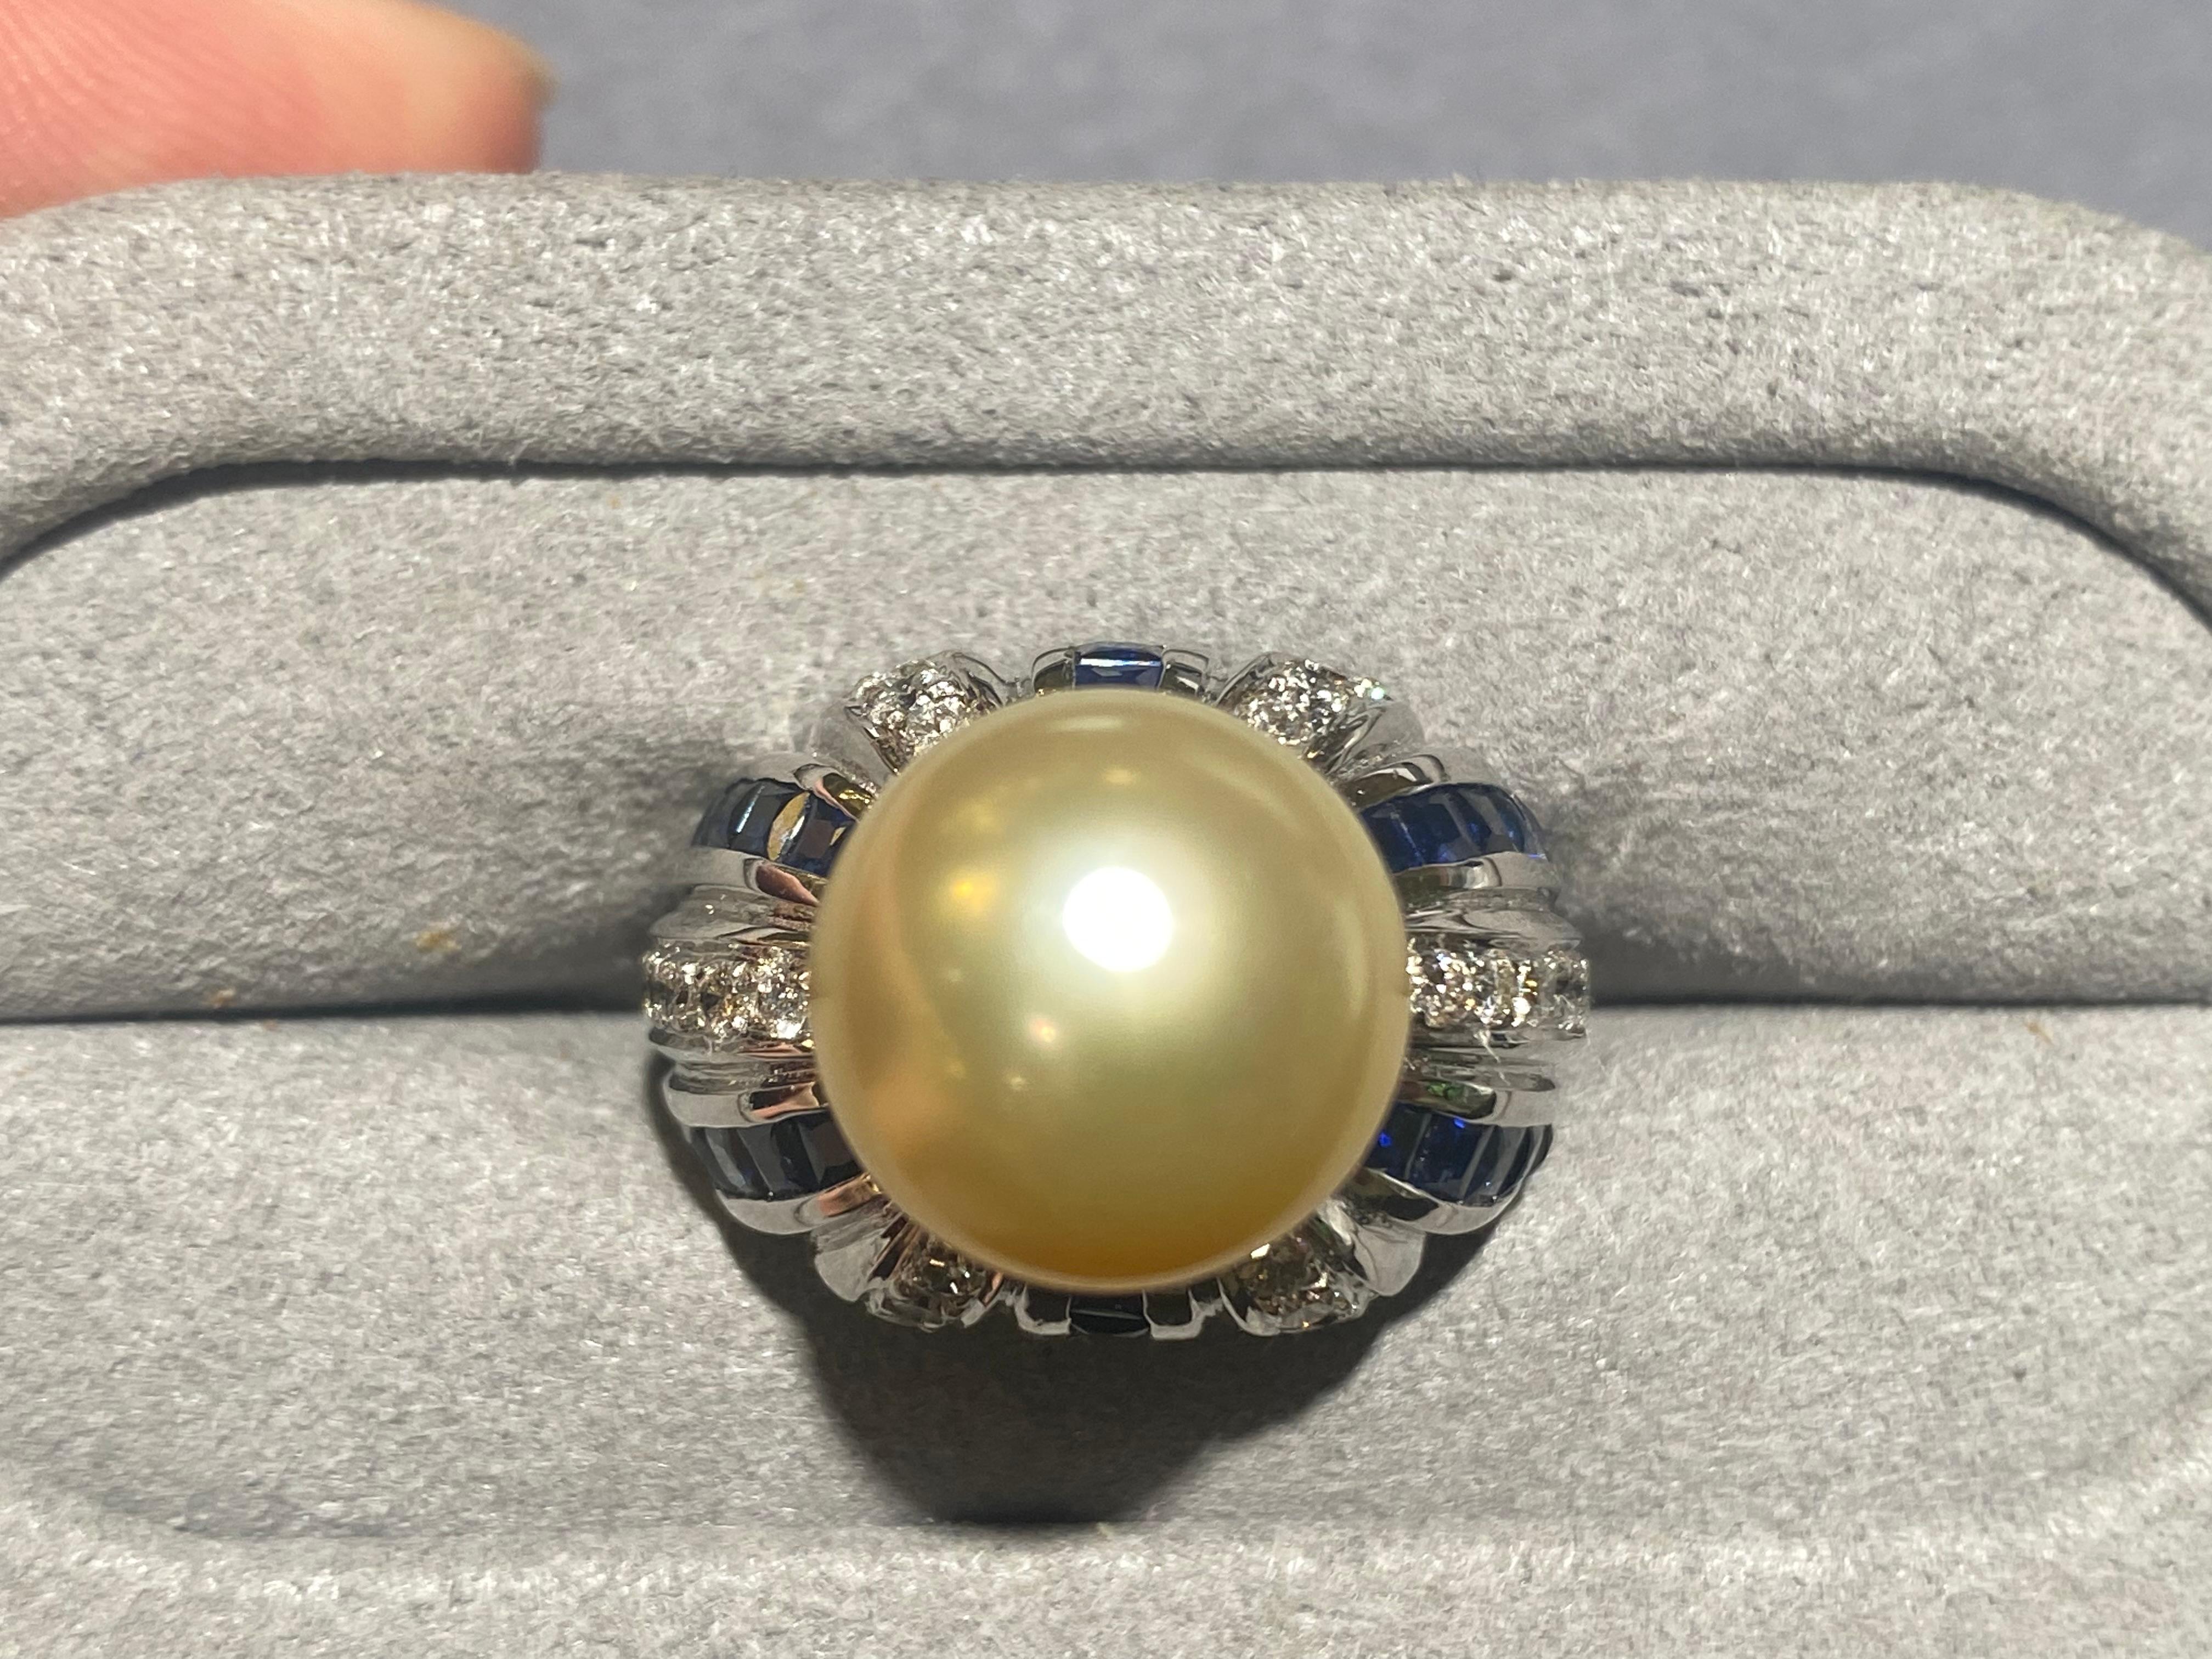 A 12.5 mm light golden South Sea Pearl, diamond and sapphire Ring in 18k white gold. The pearl is sitting in the middle of the ring and pave of diamonds and sapphire is radiating our from the base of the pearl. The pattern of the diamond and